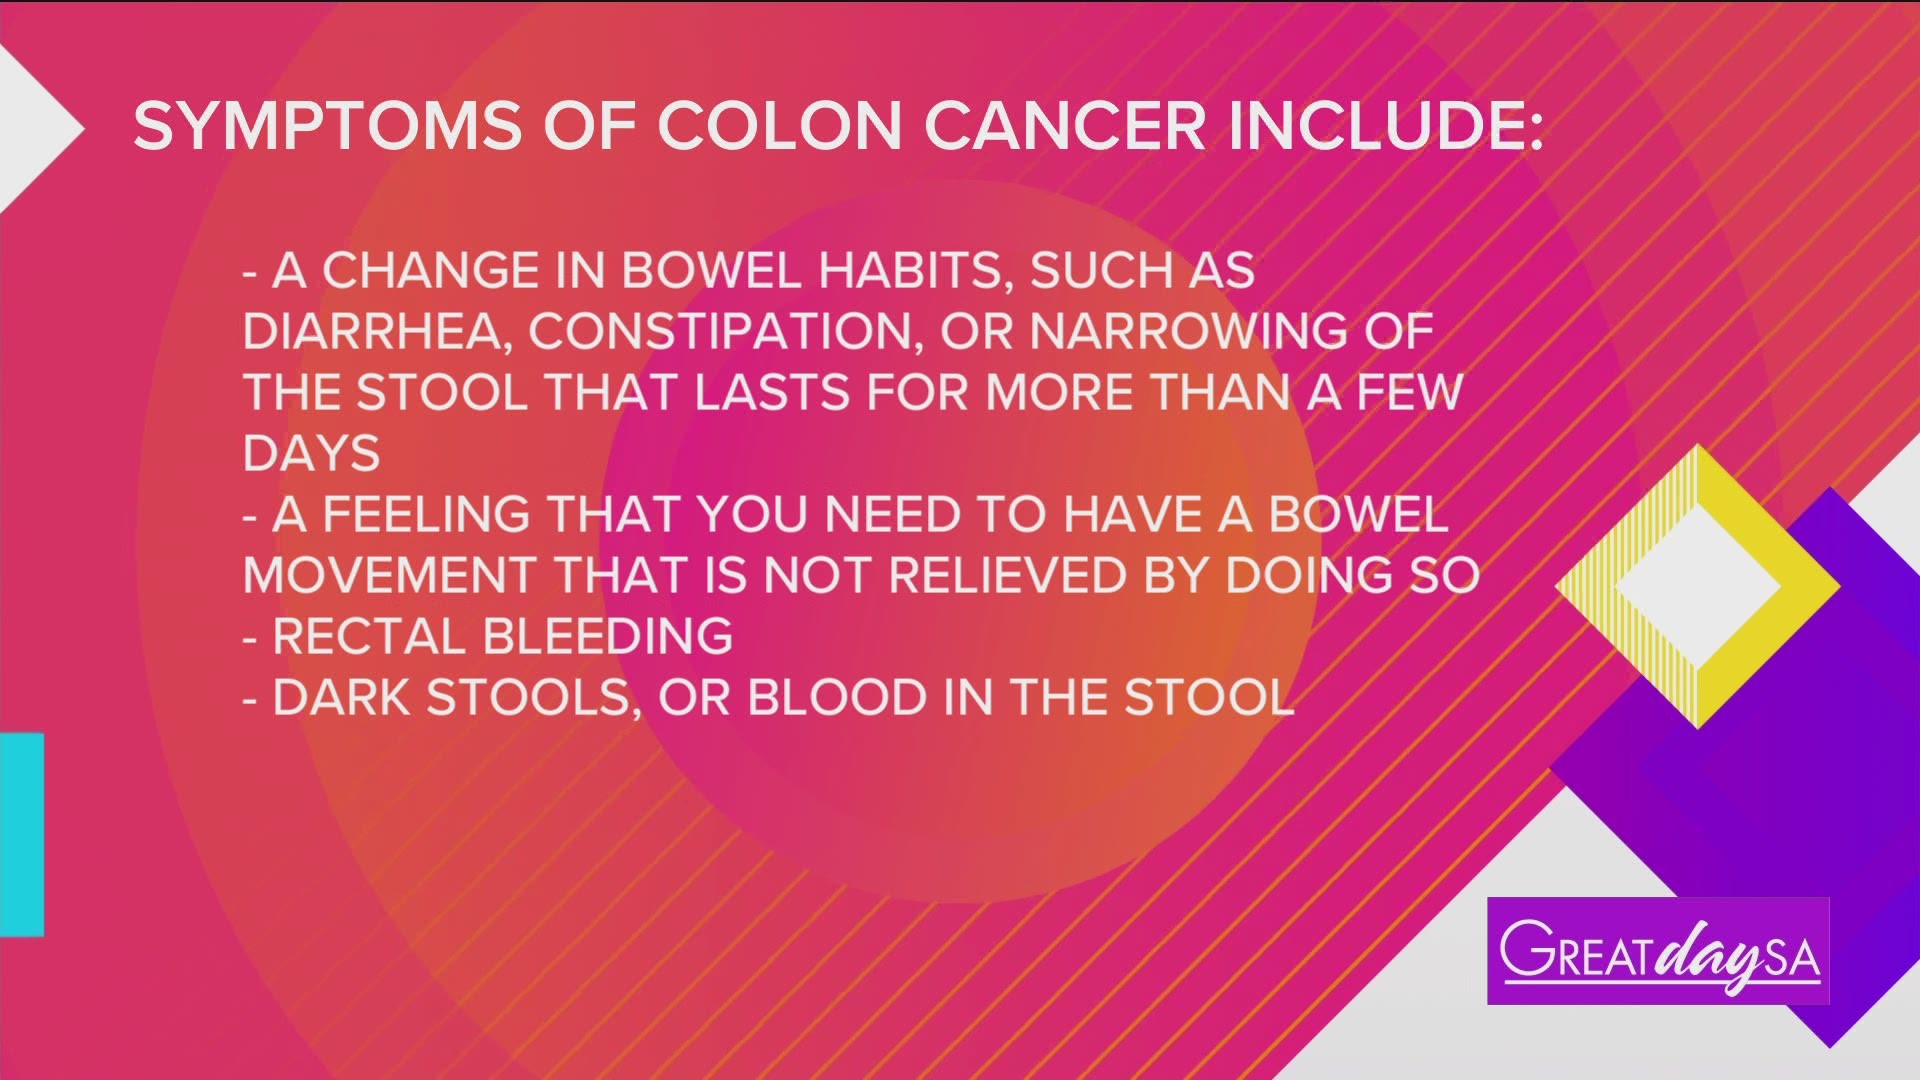 March is Colon Cancer Awareness month and Texas Oncology wants to remind you of ways you can stay healthy and take preventative measures.